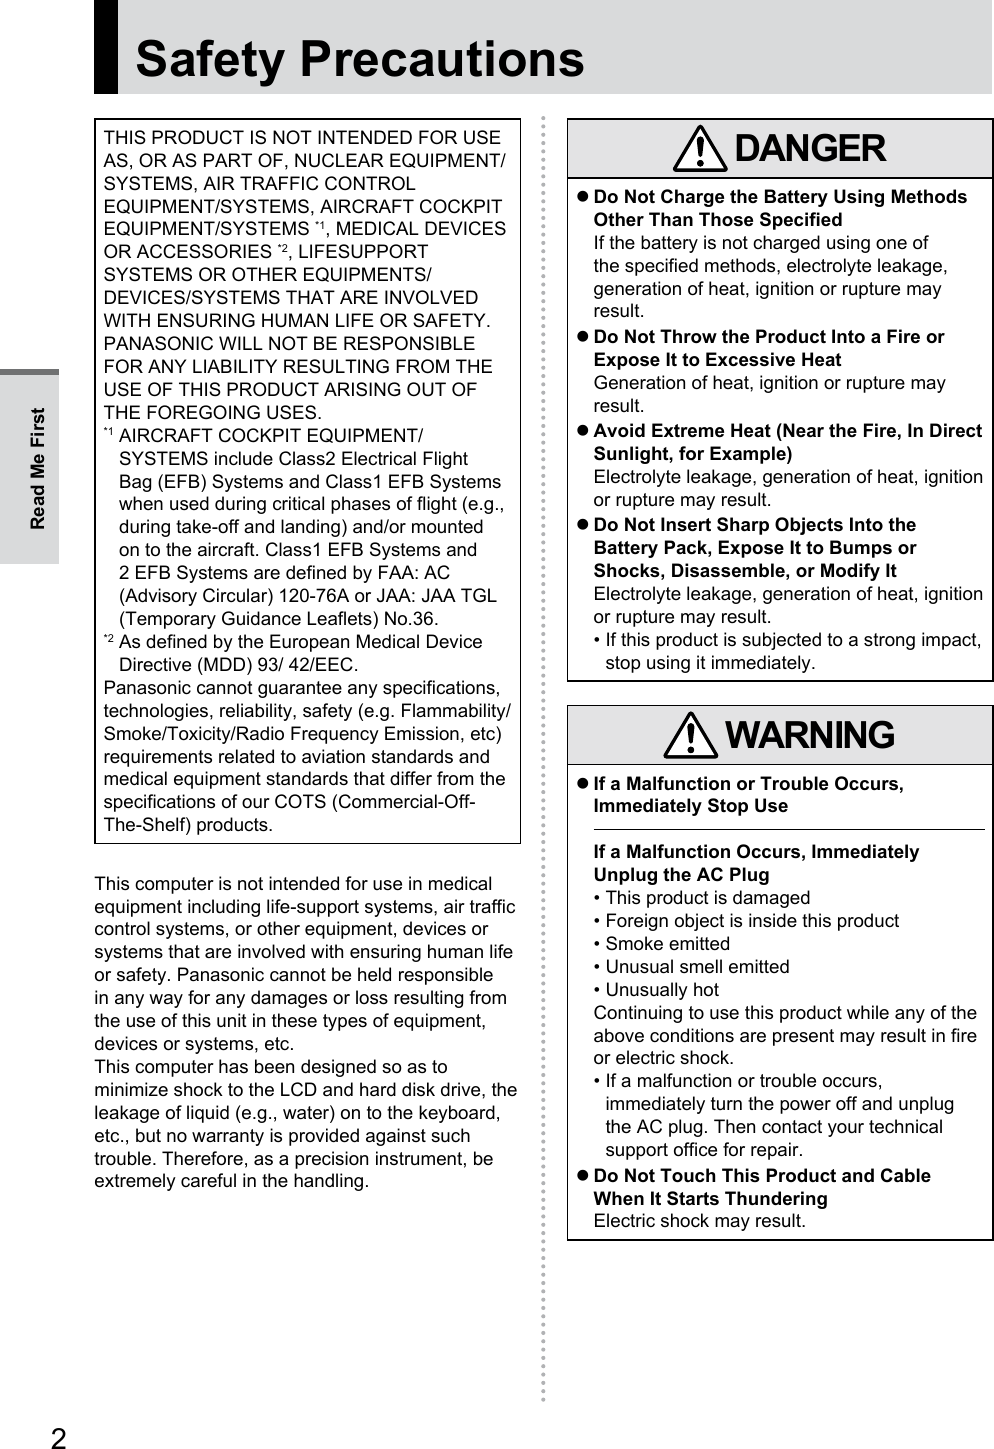 2Safety PrecautionsTHIS PRODUCT IS NOT INTENDED FOR USE AS, OR AS PART OF, NUCLEAR EQUIPMENT/SYSTEMS, AIR TRAFFIC CONTROL EQUIPMENT/SYSTEMS, AIRCRAFT COCKPIT EQUIPMENT/SYSTEMS *1, MEDICAL DEVICES OR ACCESSORIES *2, LIFESUPPORT SYSTEMS OR OTHER EQUIPMENTS/DEVICES/SYSTEMS THAT ARE INVOLVED WITH ENSURING HUMAN LIFE OR SAFETY. PANASONIC WILL NOT BE RESPONSIBLE FOR ANY LIABILITY RESULTING FROM THE USE OF THIS PRODUCT ARISING OUT OF THE FOREGOING USES.*1  AIRCRAFT COCKPIT EQUIPMENT/SYSTEMS include Class2 Electrical Flight Bag (EFB) Systems and Class1 EFB Systems when used during critical phases of flight (e.g., during take-off and landing) and/or mounted on to the aircraft. Class1 EFB Systems and 2 EFB Systems are defined by FAA: AC (Advisory Circular) 120-76A or JAA: JAA TGL (Temporary Guidance Leaflets) No.36.*2  As defined by the European Medical Device Directive (MDD) 93/ 42/EEC.Panasonic cannot guarantee any specifications, technologies, reliability, safety (e.g. Flammability/Smoke/Toxicity/Radio Frequency Emission, etc) requirements related to aviation standards and medical equipment standards that differ from the specifications of our COTS (Commercial-Off-The-Shelf) products.This computer is not intended for use in medical equipment including life-support systems, air traffic control systems, or other equipment, devices or systems that are involved with ensuring human life or safety. Panasonic cannot be held responsible in any way for any damages or loss resulting from the use of this unit in these types of equipment, devices or systems, etc.This computer has been designed so as to minimize shock to the LCD and hard disk drive, the leakage of liquid (e.g., water) on to the keyboard, etc., but no warranty is provided against such trouble. Therefore, as a precision instrument, be extremely careful in the handling. DANGER zDo Not Charge the Battery Using Methods Other Than Those SpecifiedIf the battery is not charged using one of the specified methods, electrolyte leakage, generation of heat, ignition or rupture may result. zDo Not Throw the Product Into a Fire or Expose It to Excessive HeatGeneration of heat, ignition or rupture may result. zAvoid Extreme Heat (Near the Fire, In Direct Sunlight, for Example)Electrolyte leakage, generation of heat, ignition or rupture may result. zDo Not Insert Sharp Objects Into the Battery Pack, Expose It to Bumps or Shocks, Disassemble, or Modify ItElectrolyte leakage, generation of heat, ignition or rupture may result.• If this product is subjected to a strong impact, stop using it immediately. WARNING zIf a Malfunction or Trouble Occurs, Immediately Stop UseIf a Malfunction Occurs, Immediately Unplug the AC Plug• This product is damaged• Foreign object is inside this product• Smoke emitted• Unusual smell emitted• Unusually hotContinuing to use this product while any of the above conditions are present may result in fire or electric shock.• If a malfunction or trouble occurs, immediately turn the power off and unplug the AC plug. Then contact your technical support office for repair. zDo Not Touch This Product and Cable When It Starts ThunderingElectric shock may result.Read Me First